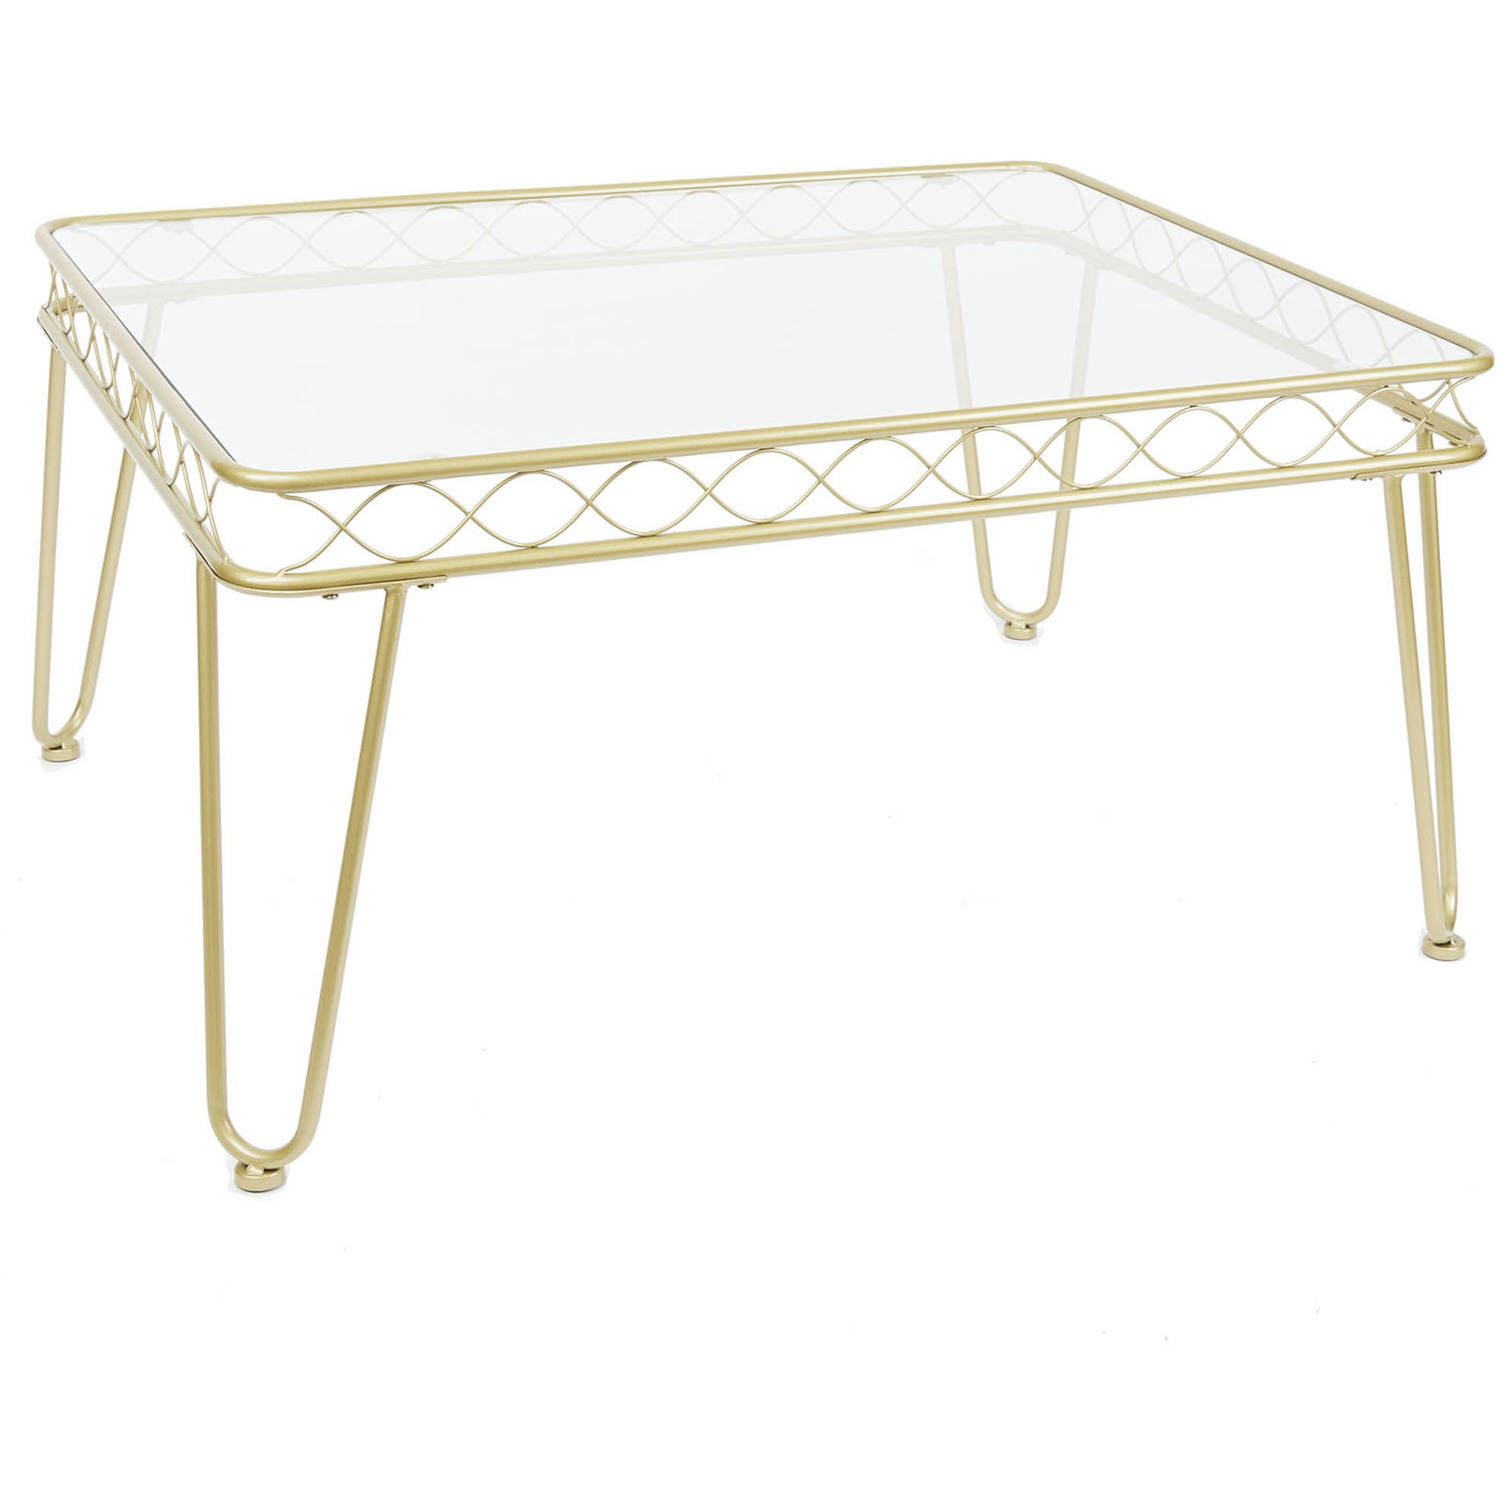 Better Homes & Gardens Mirabella Coffee Table - image 1 of 3